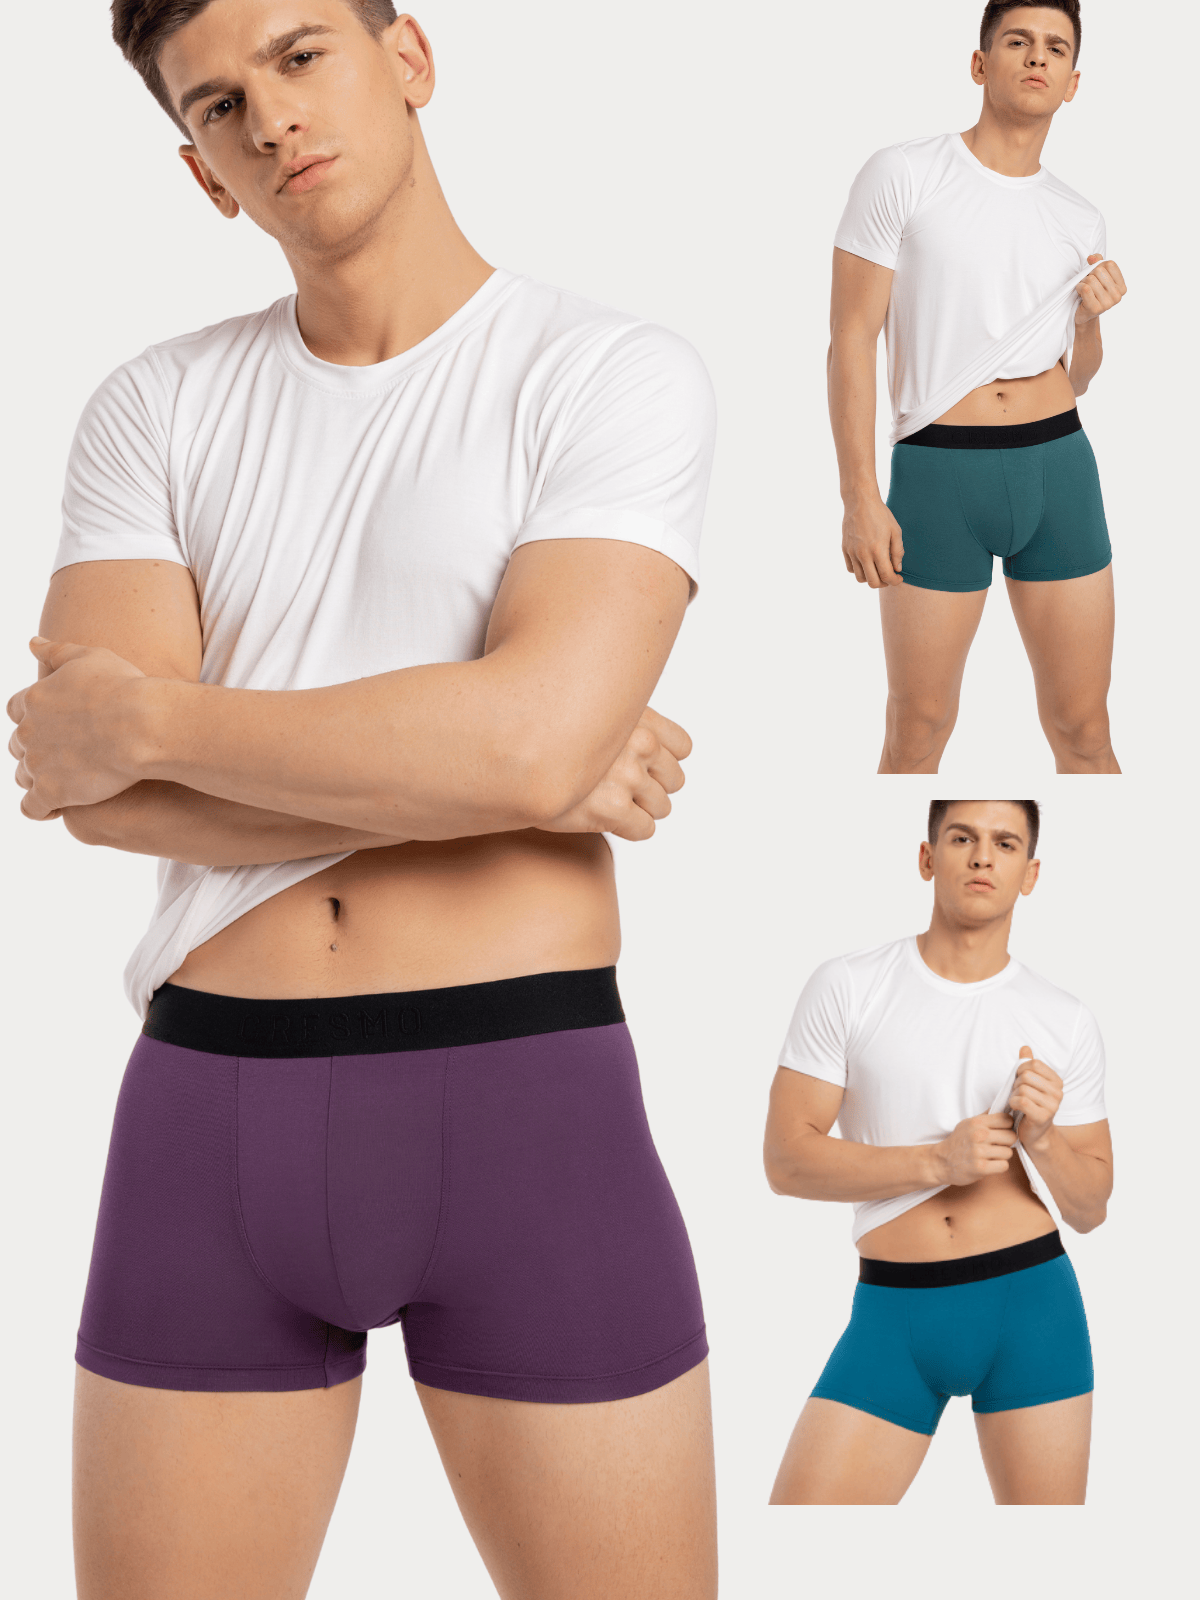 CRESMO Men's Anti-Microbial Micro Modal Underwear Breathable Ultra Soft Trunk (Pack of 3)